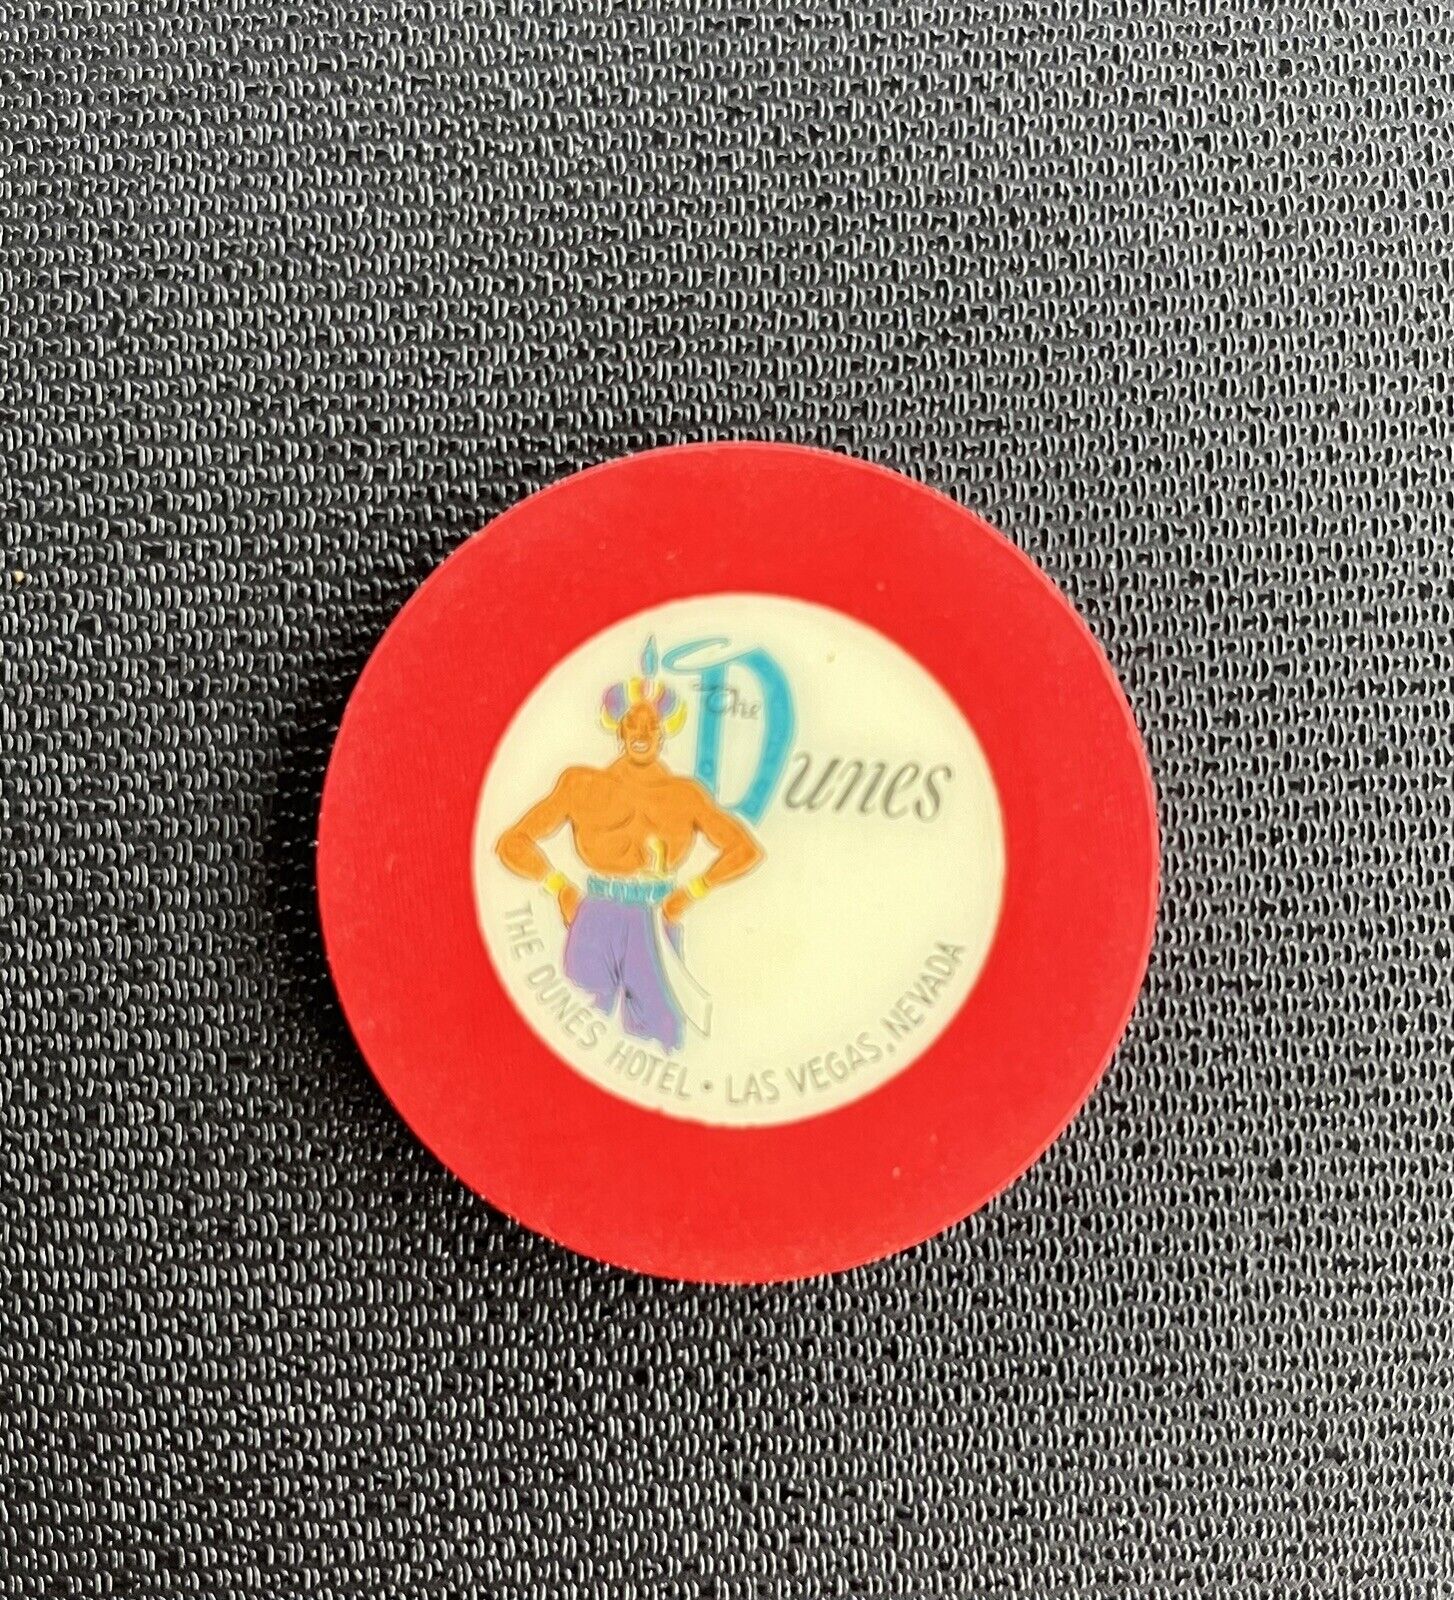 Las Vegas Dunes Hotel Rare 1955 Red Roulette Chip N1511.Red